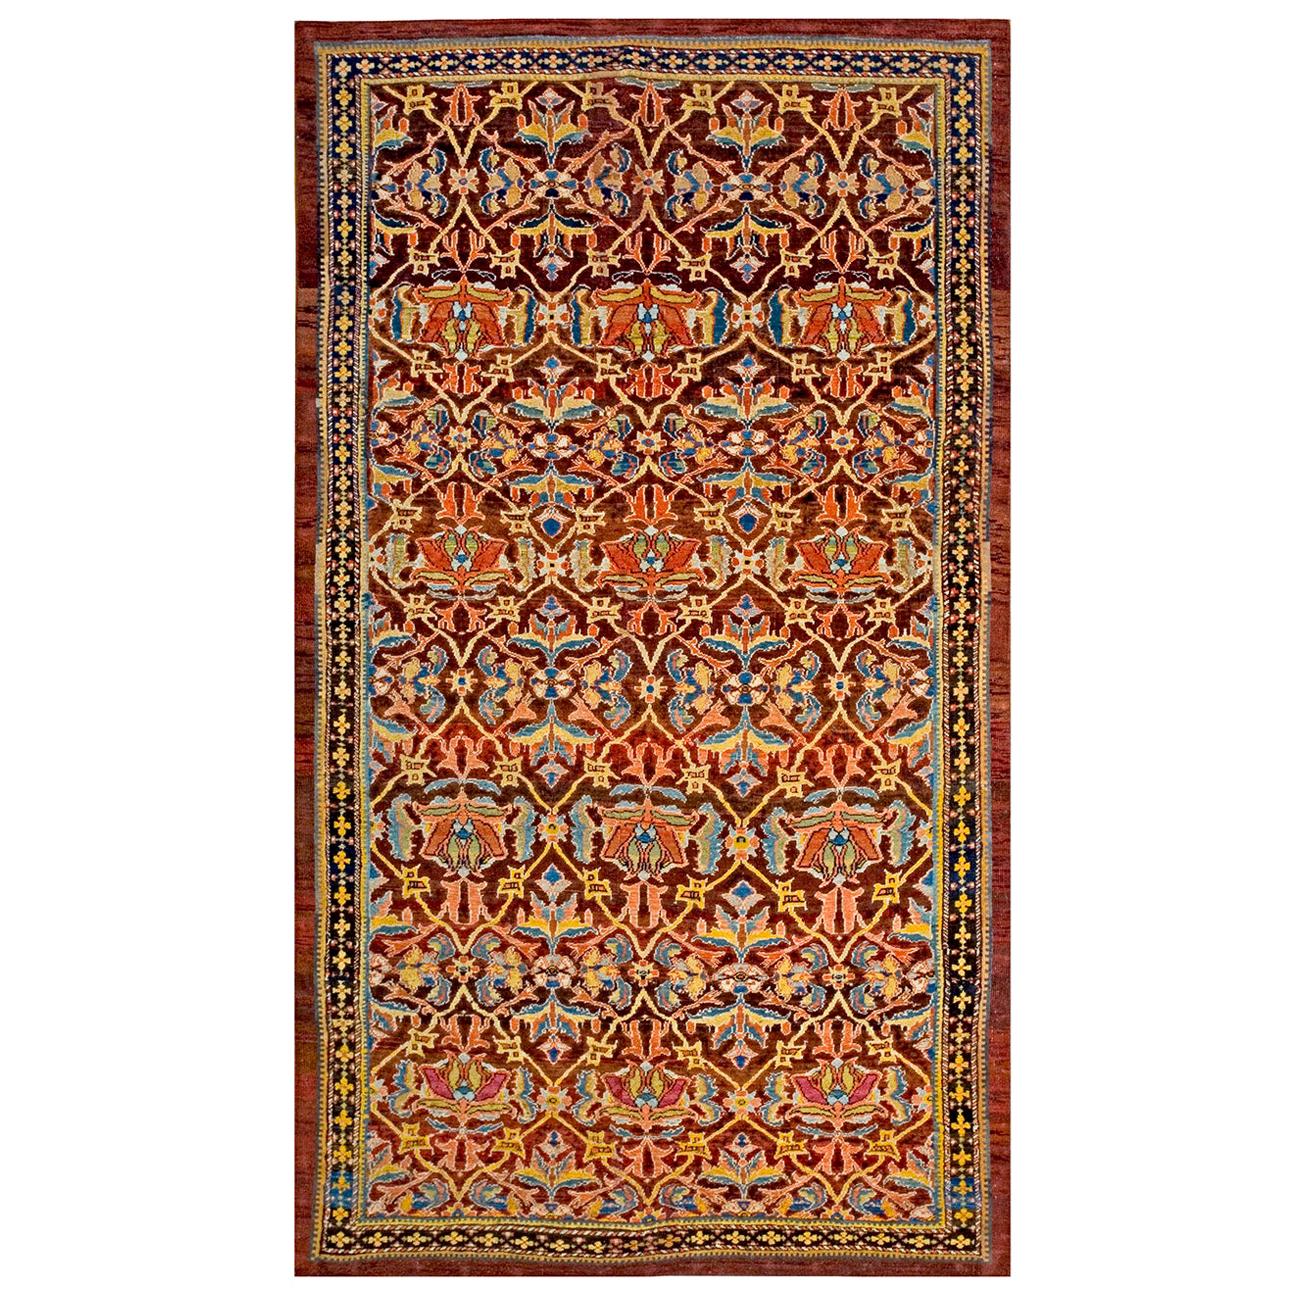 Antique Sultanabad Persian Rug 5' 0" x 9' 2"